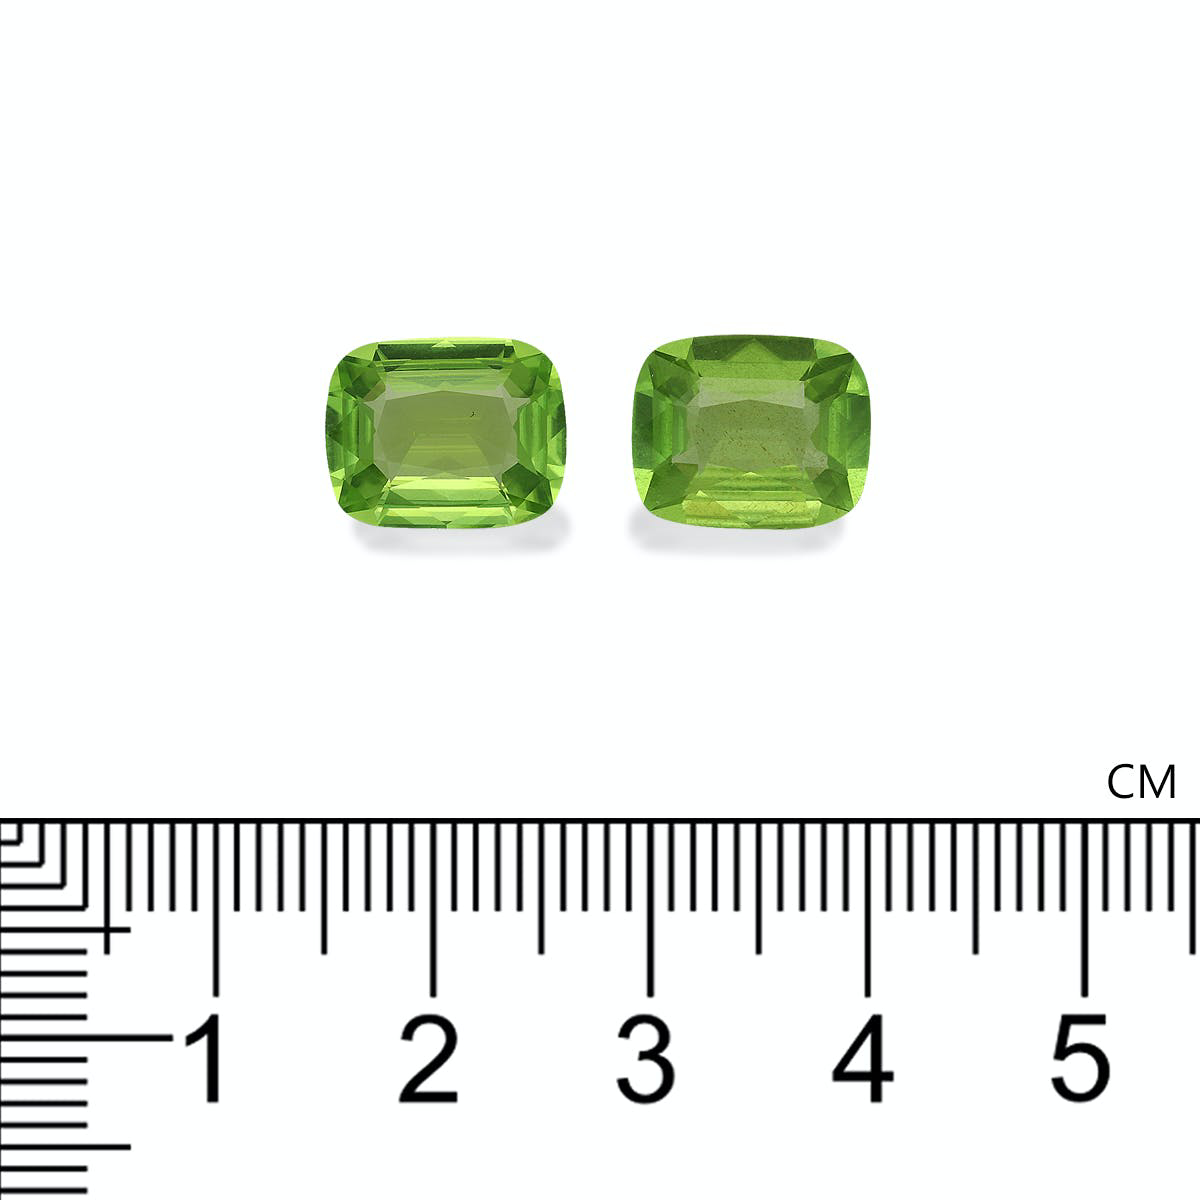 Picture of Pistachio Green Peridot 6.82ct - 11x9mm Pair (PD0152)